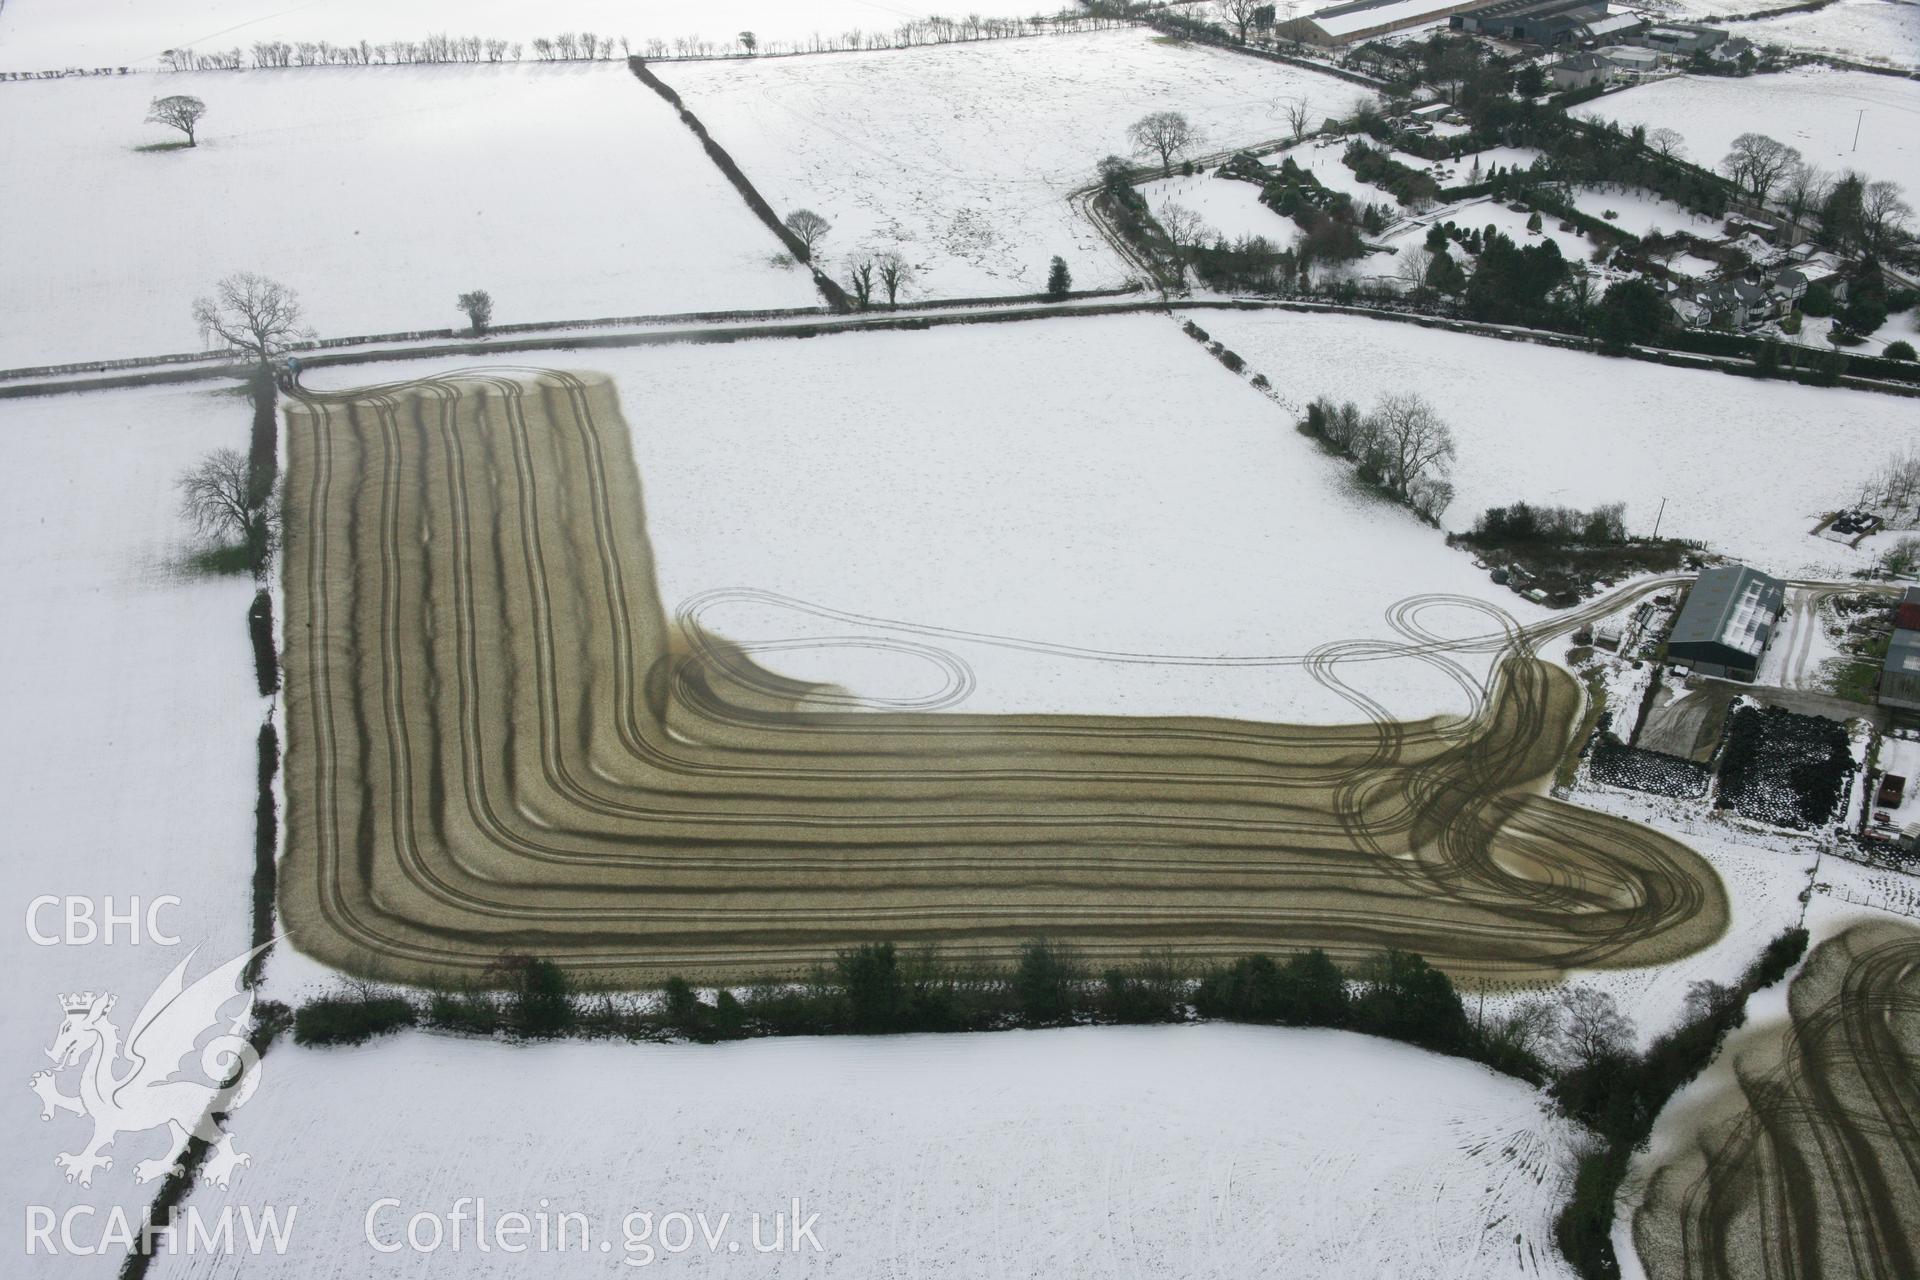 RCAHMW colour oblique aerial photograph of Llidiart-Fawr Farm, with slurry spreading on winter fields Taken on 06 March 2006 by Toby Driver.